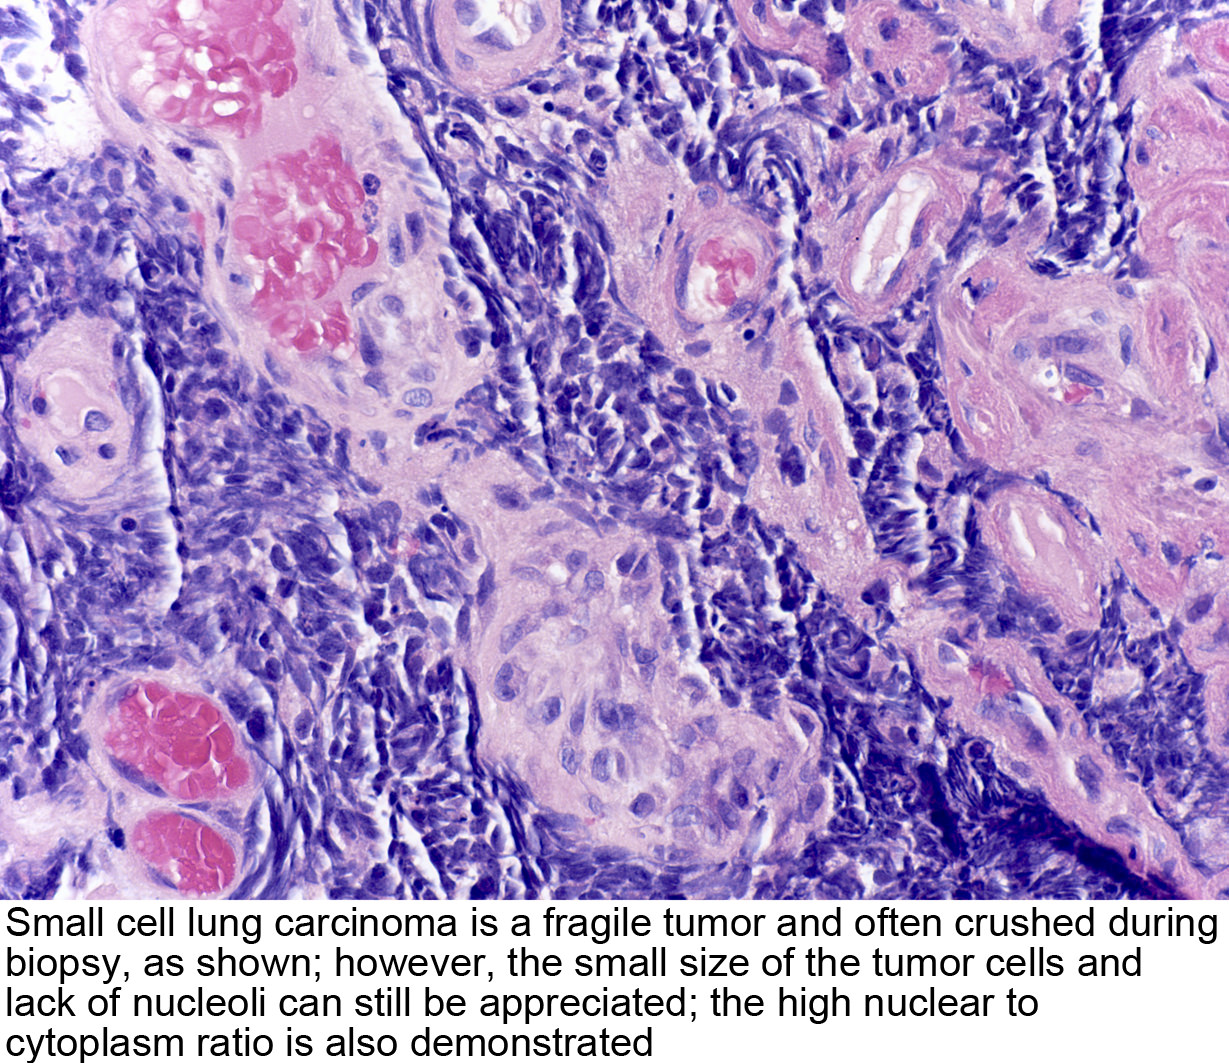 Pathology Outlines - Small cell carcinoma